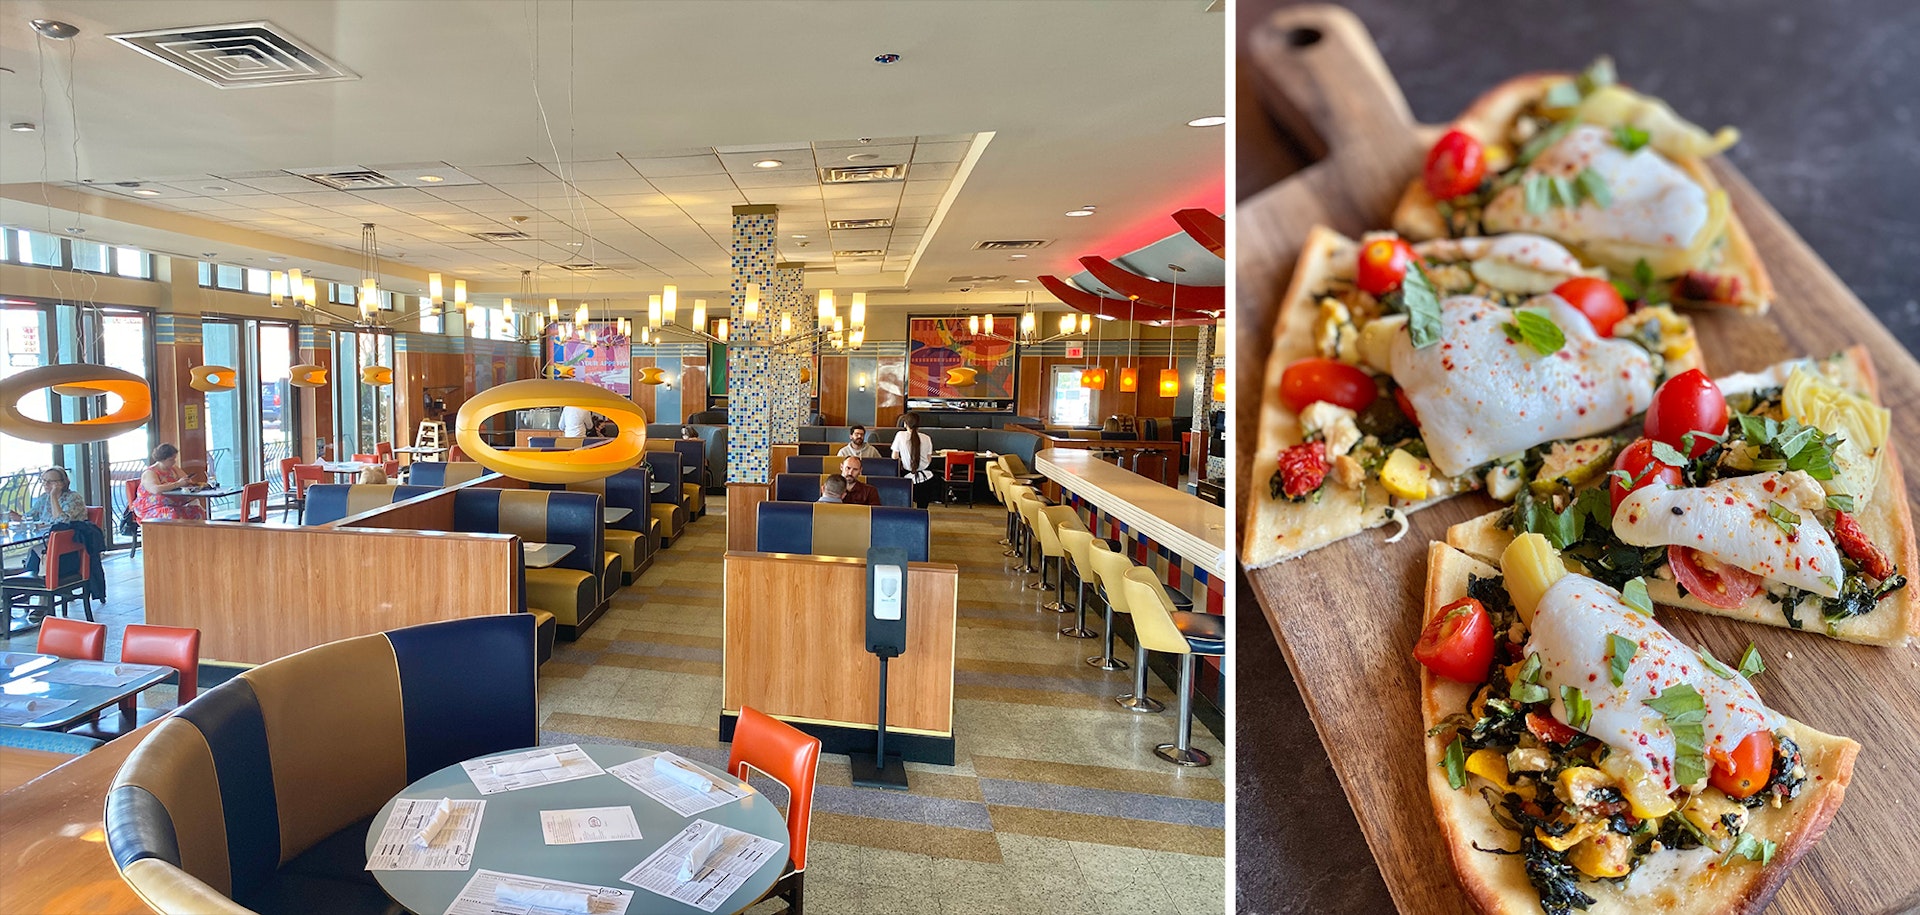 Left: the interior of a diner with booths and bold colors. Right: an appetizer